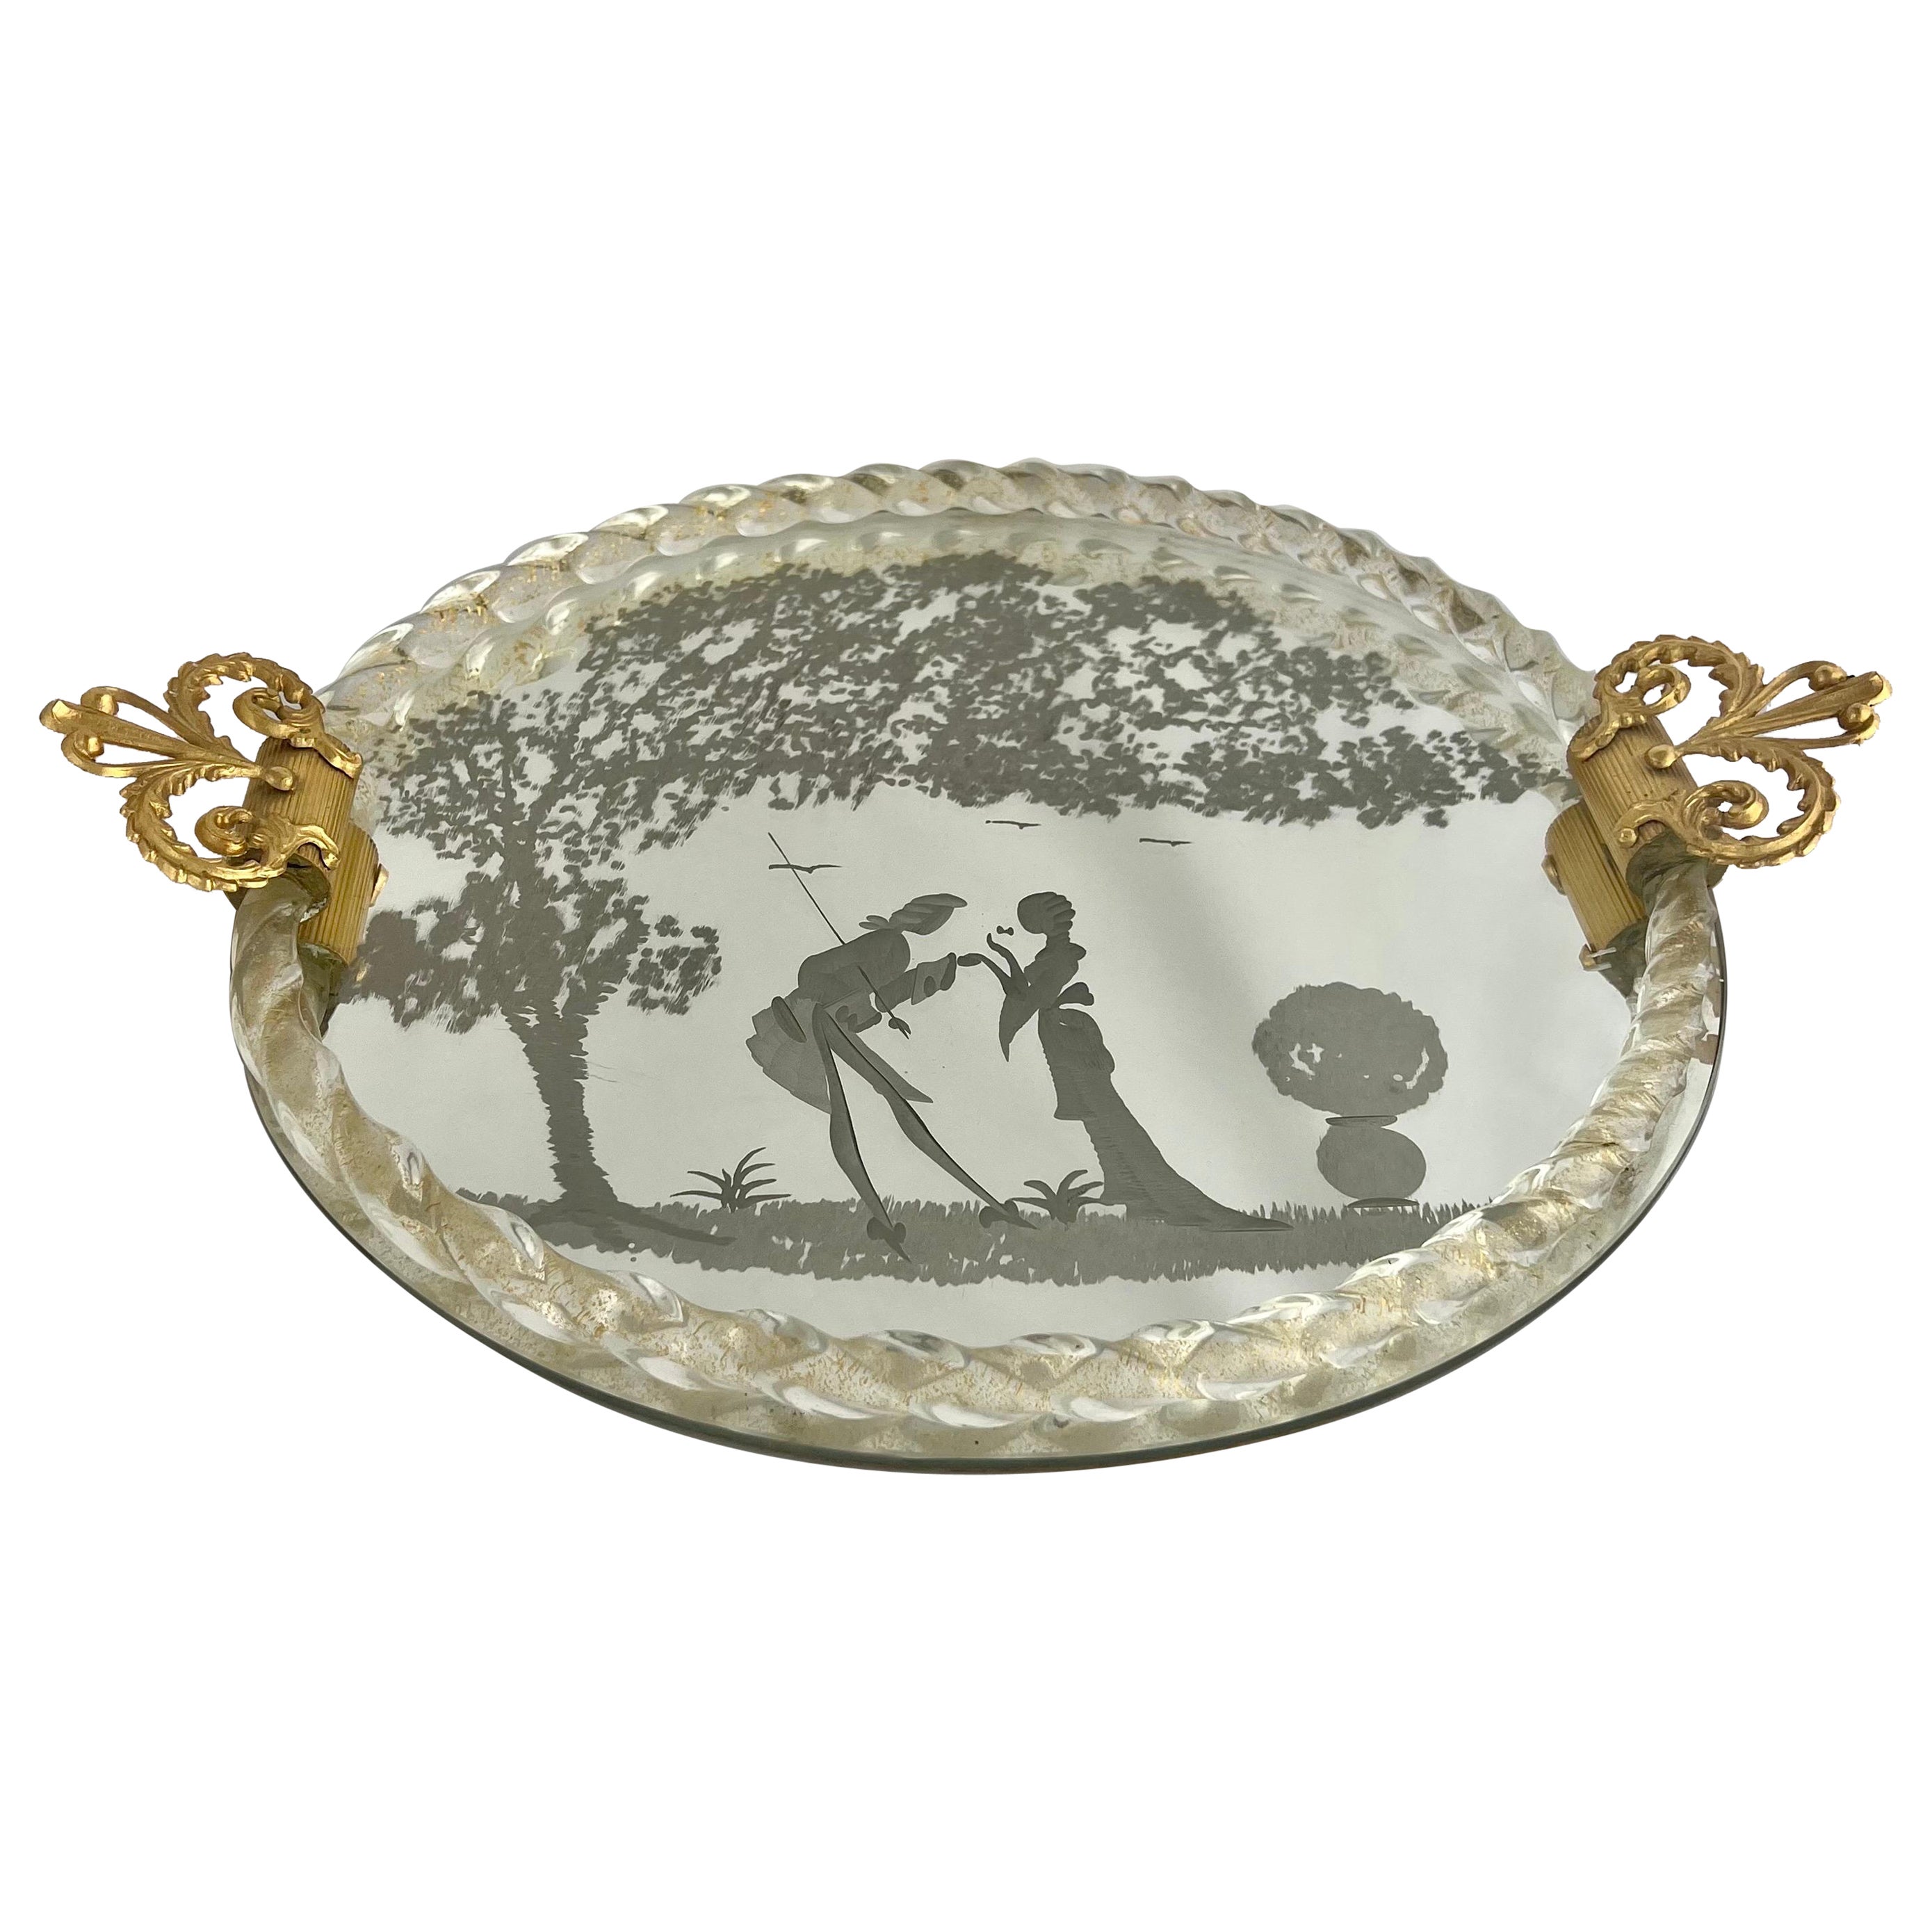 Pour Le Bain-Murano Venetian Etched Mirrored Tray